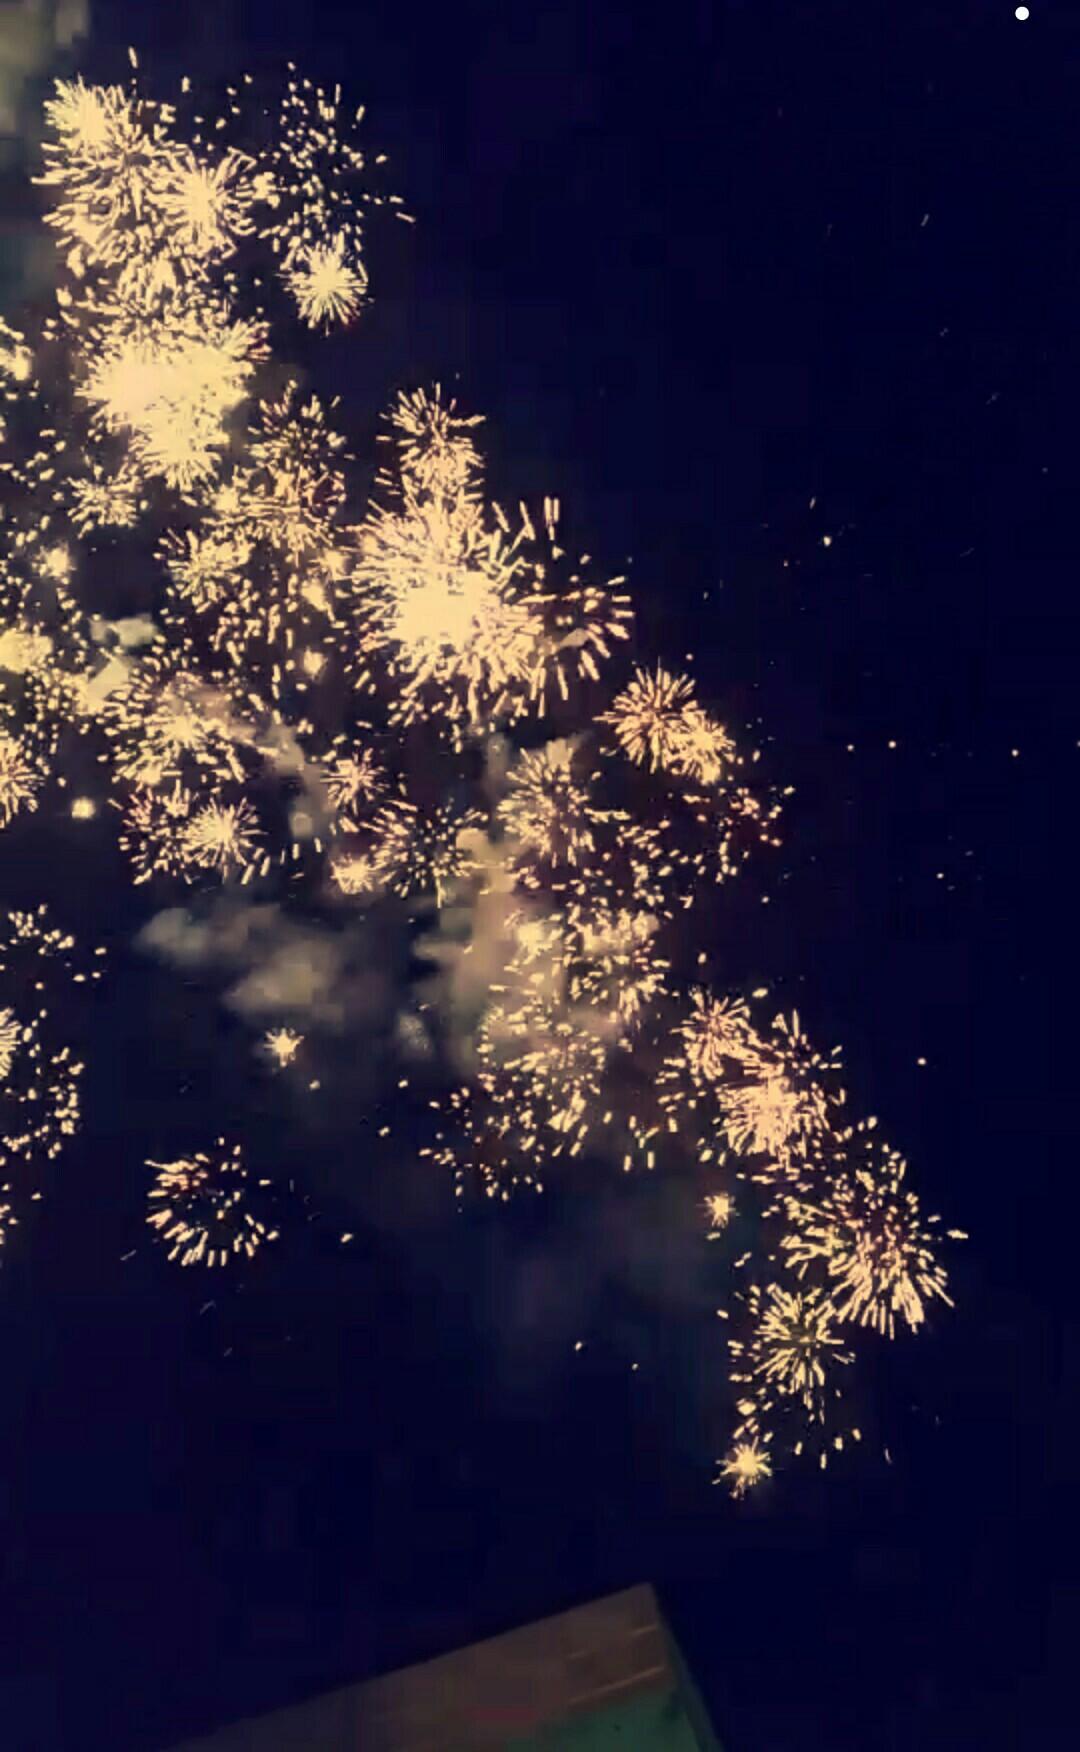 🎆🎆sorry for the quality but these were the fireworks from last night at the party. check remixes for more🎆🎆
🎆~1•1•18~🎆